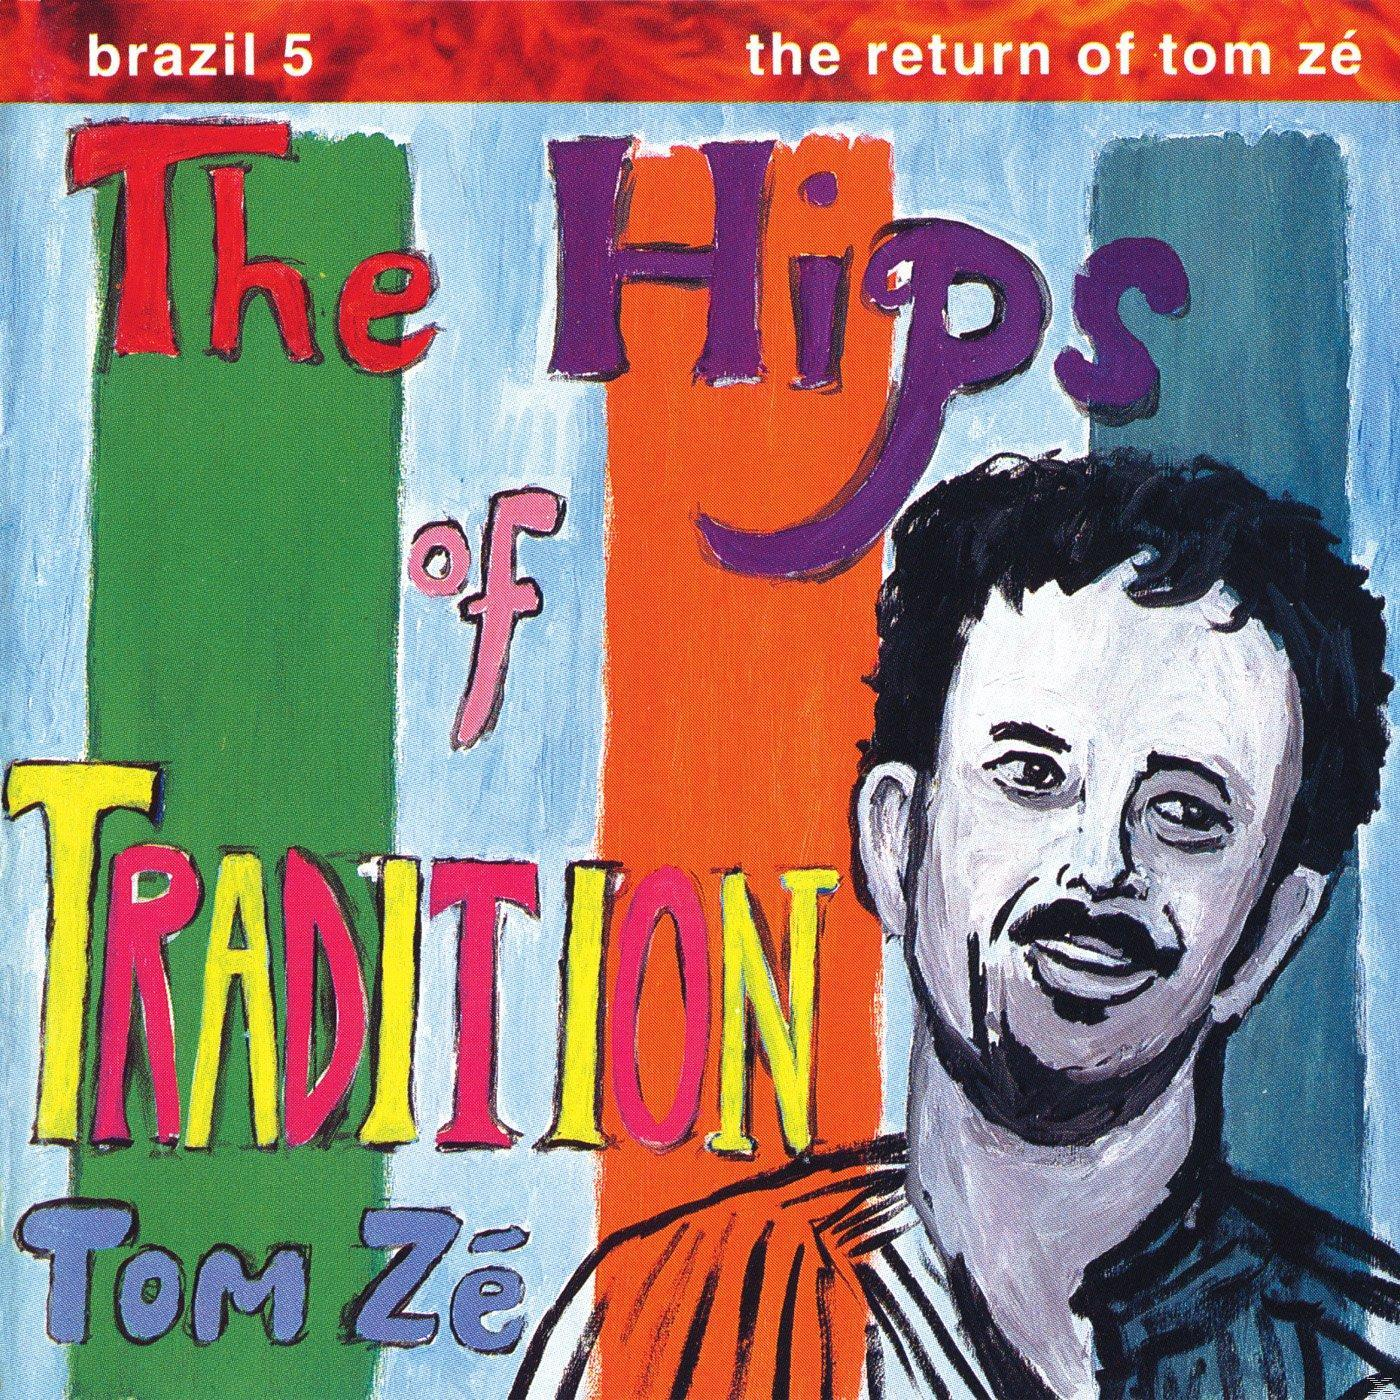 VARIOUS - Brazil (Vinyl) The 5: Classics - Ret Hips Of Tradition-The